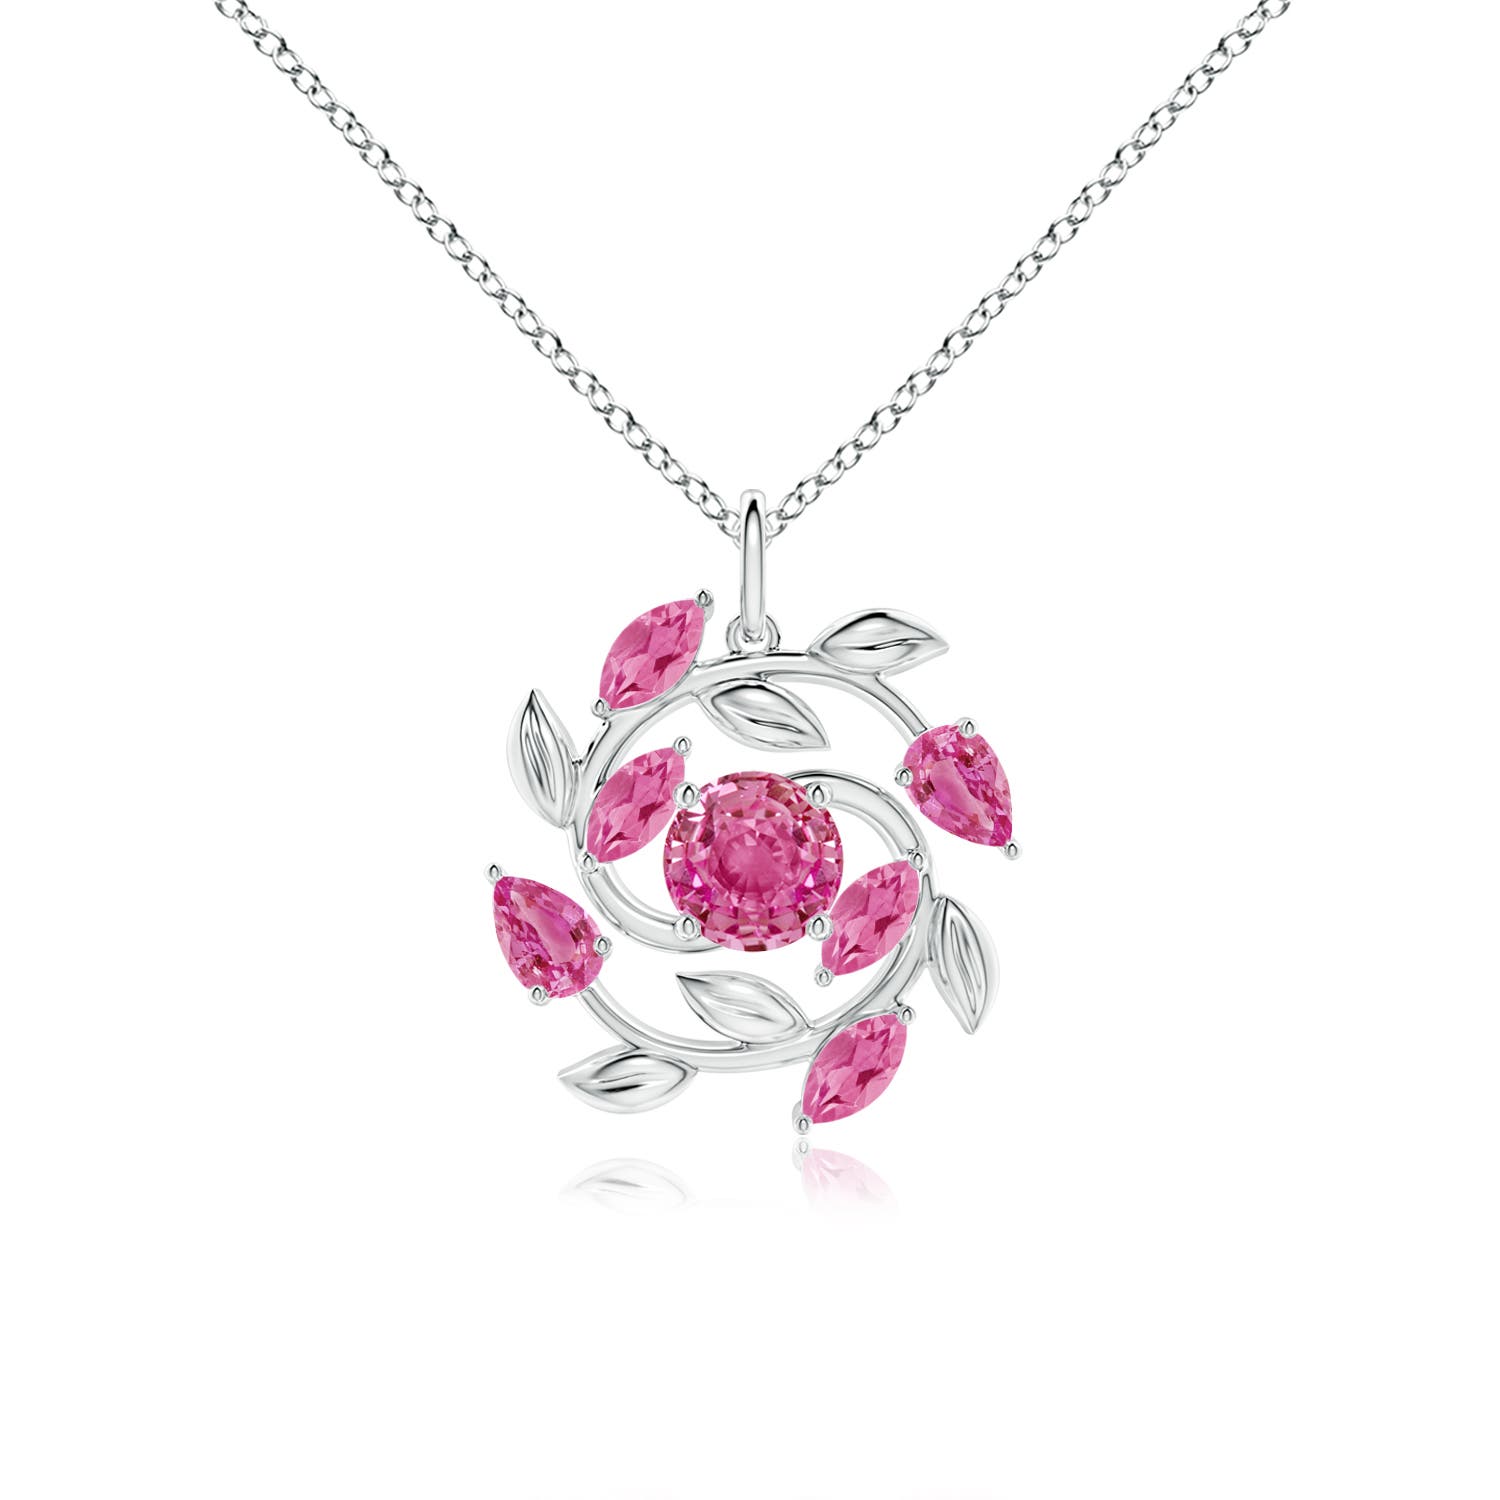 14K White Gold Pink Sapphire and Diamond Cluster Pendant Necklace